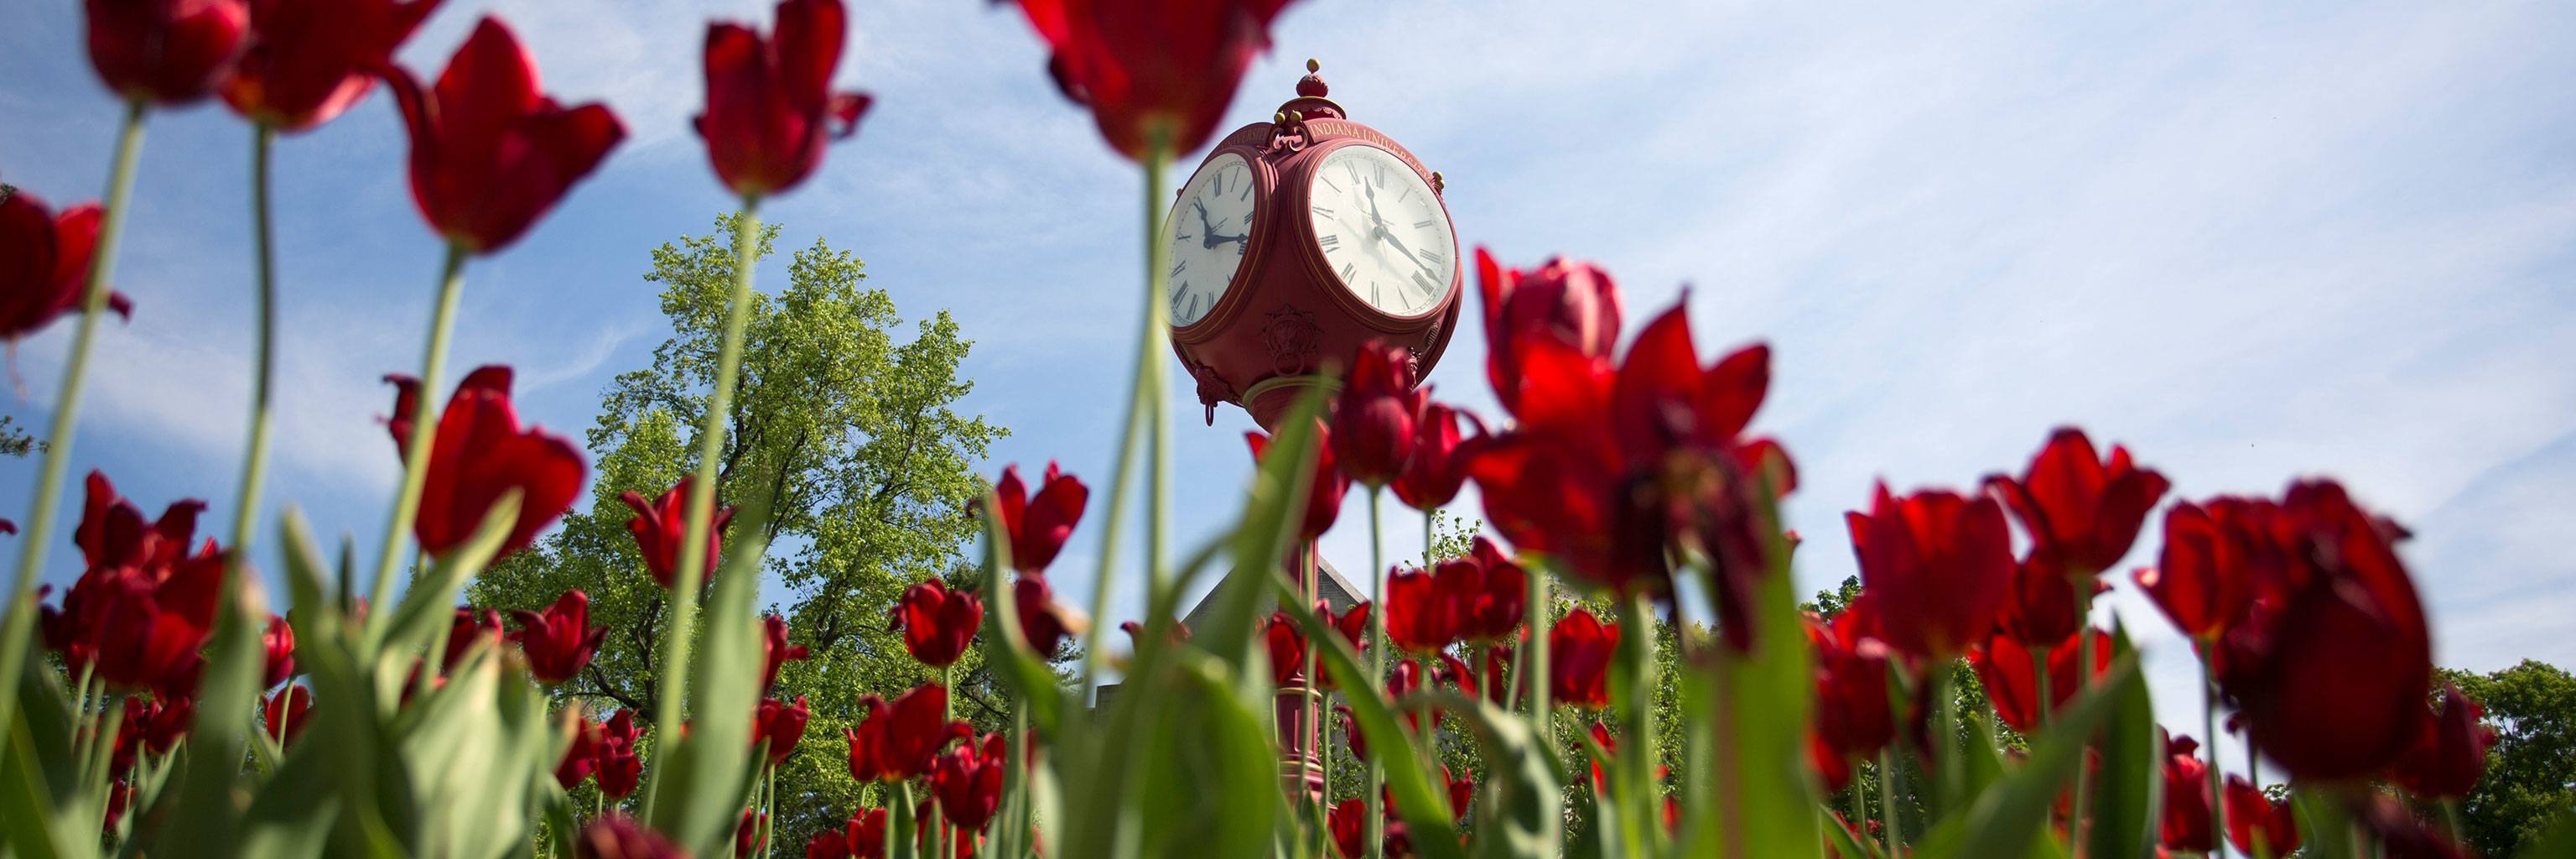 Red tulips and a red clock.